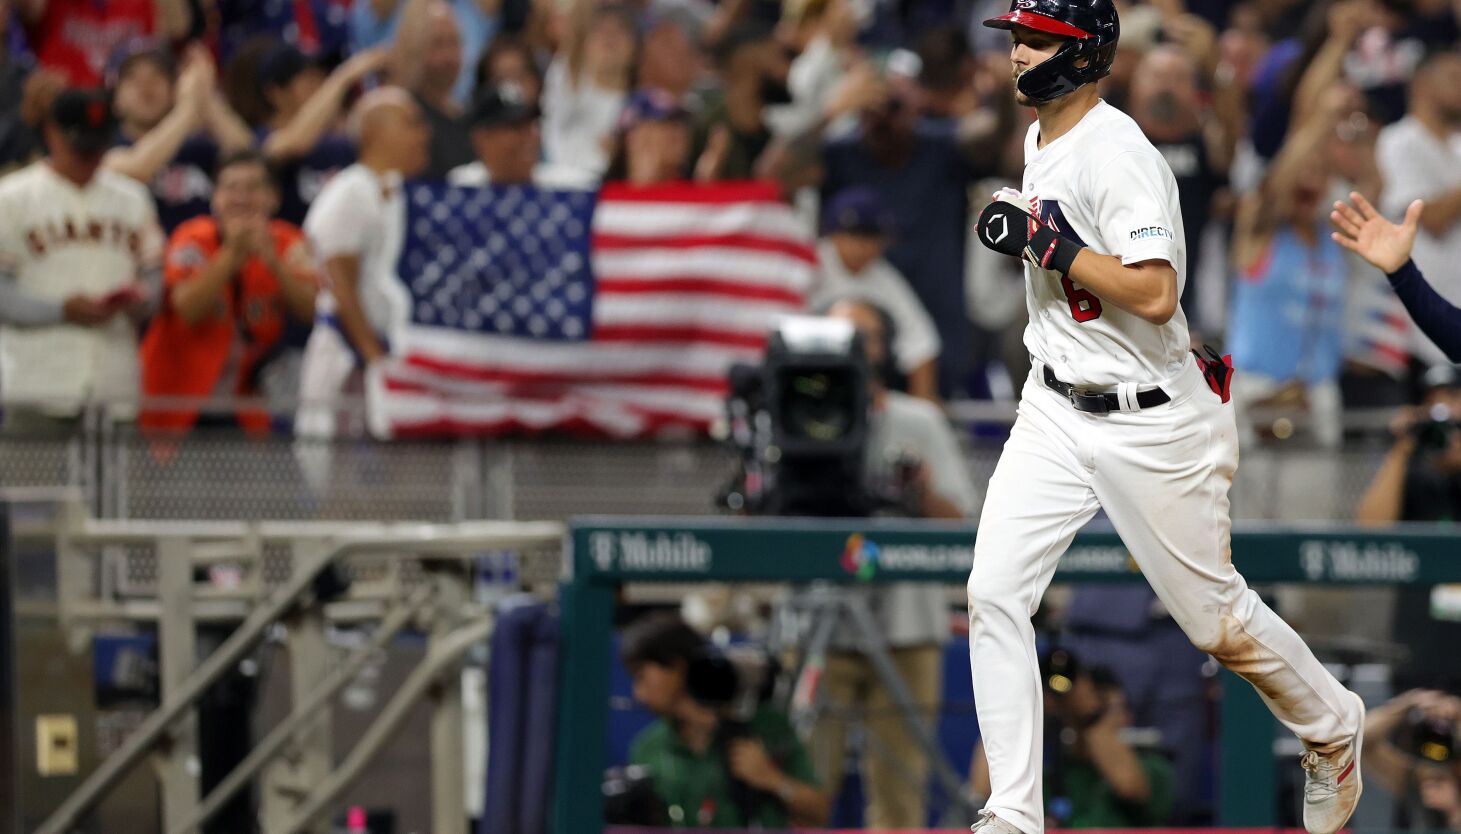 The US beat Cuba 14-2 to reach the finals of the World Baseball Classic